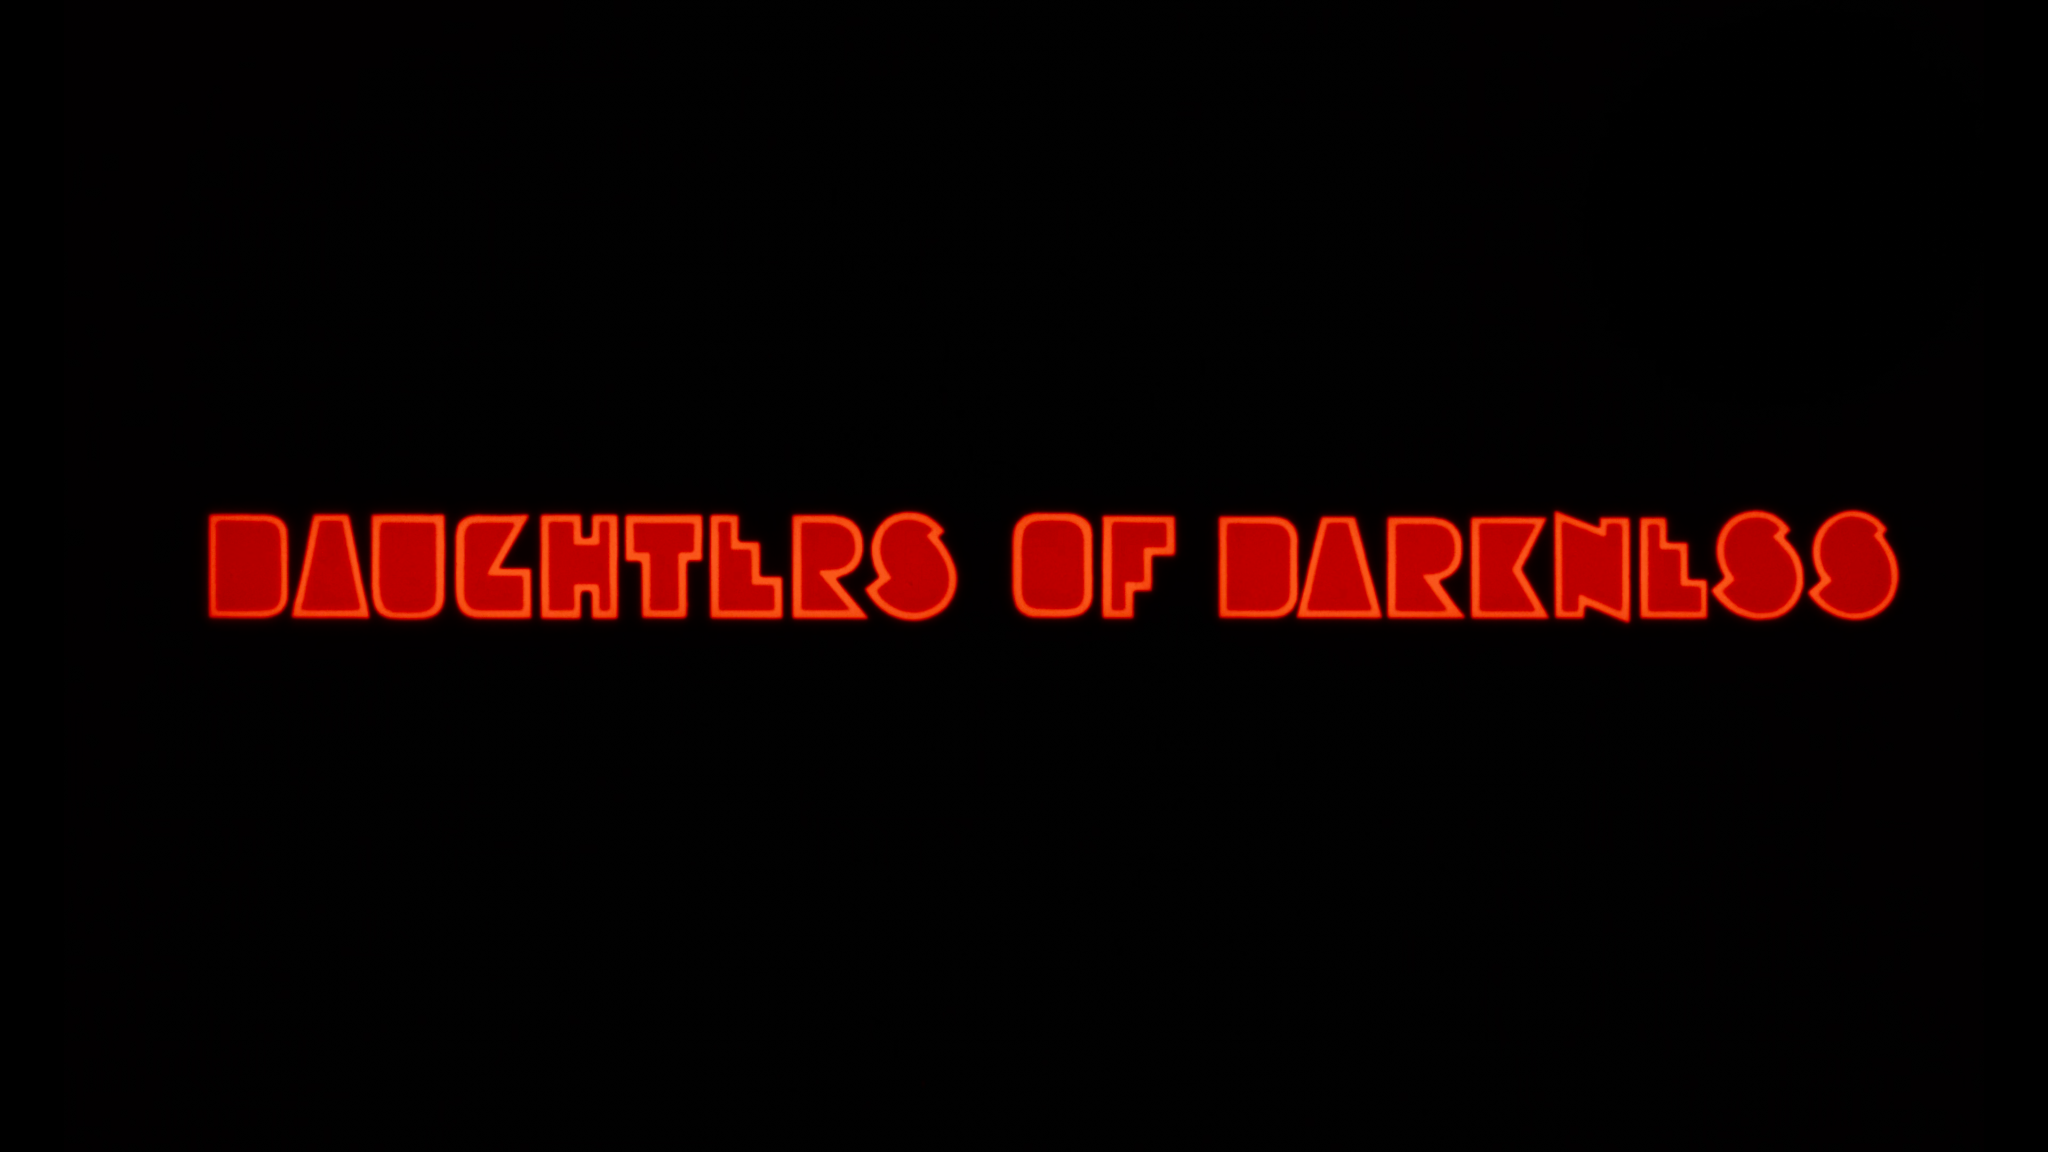 Dark daughters. Daughters of Darkness 1971. Дочери тьмы / les lèvres rouges (1971). Daughter of Darkness 1971 кадры.